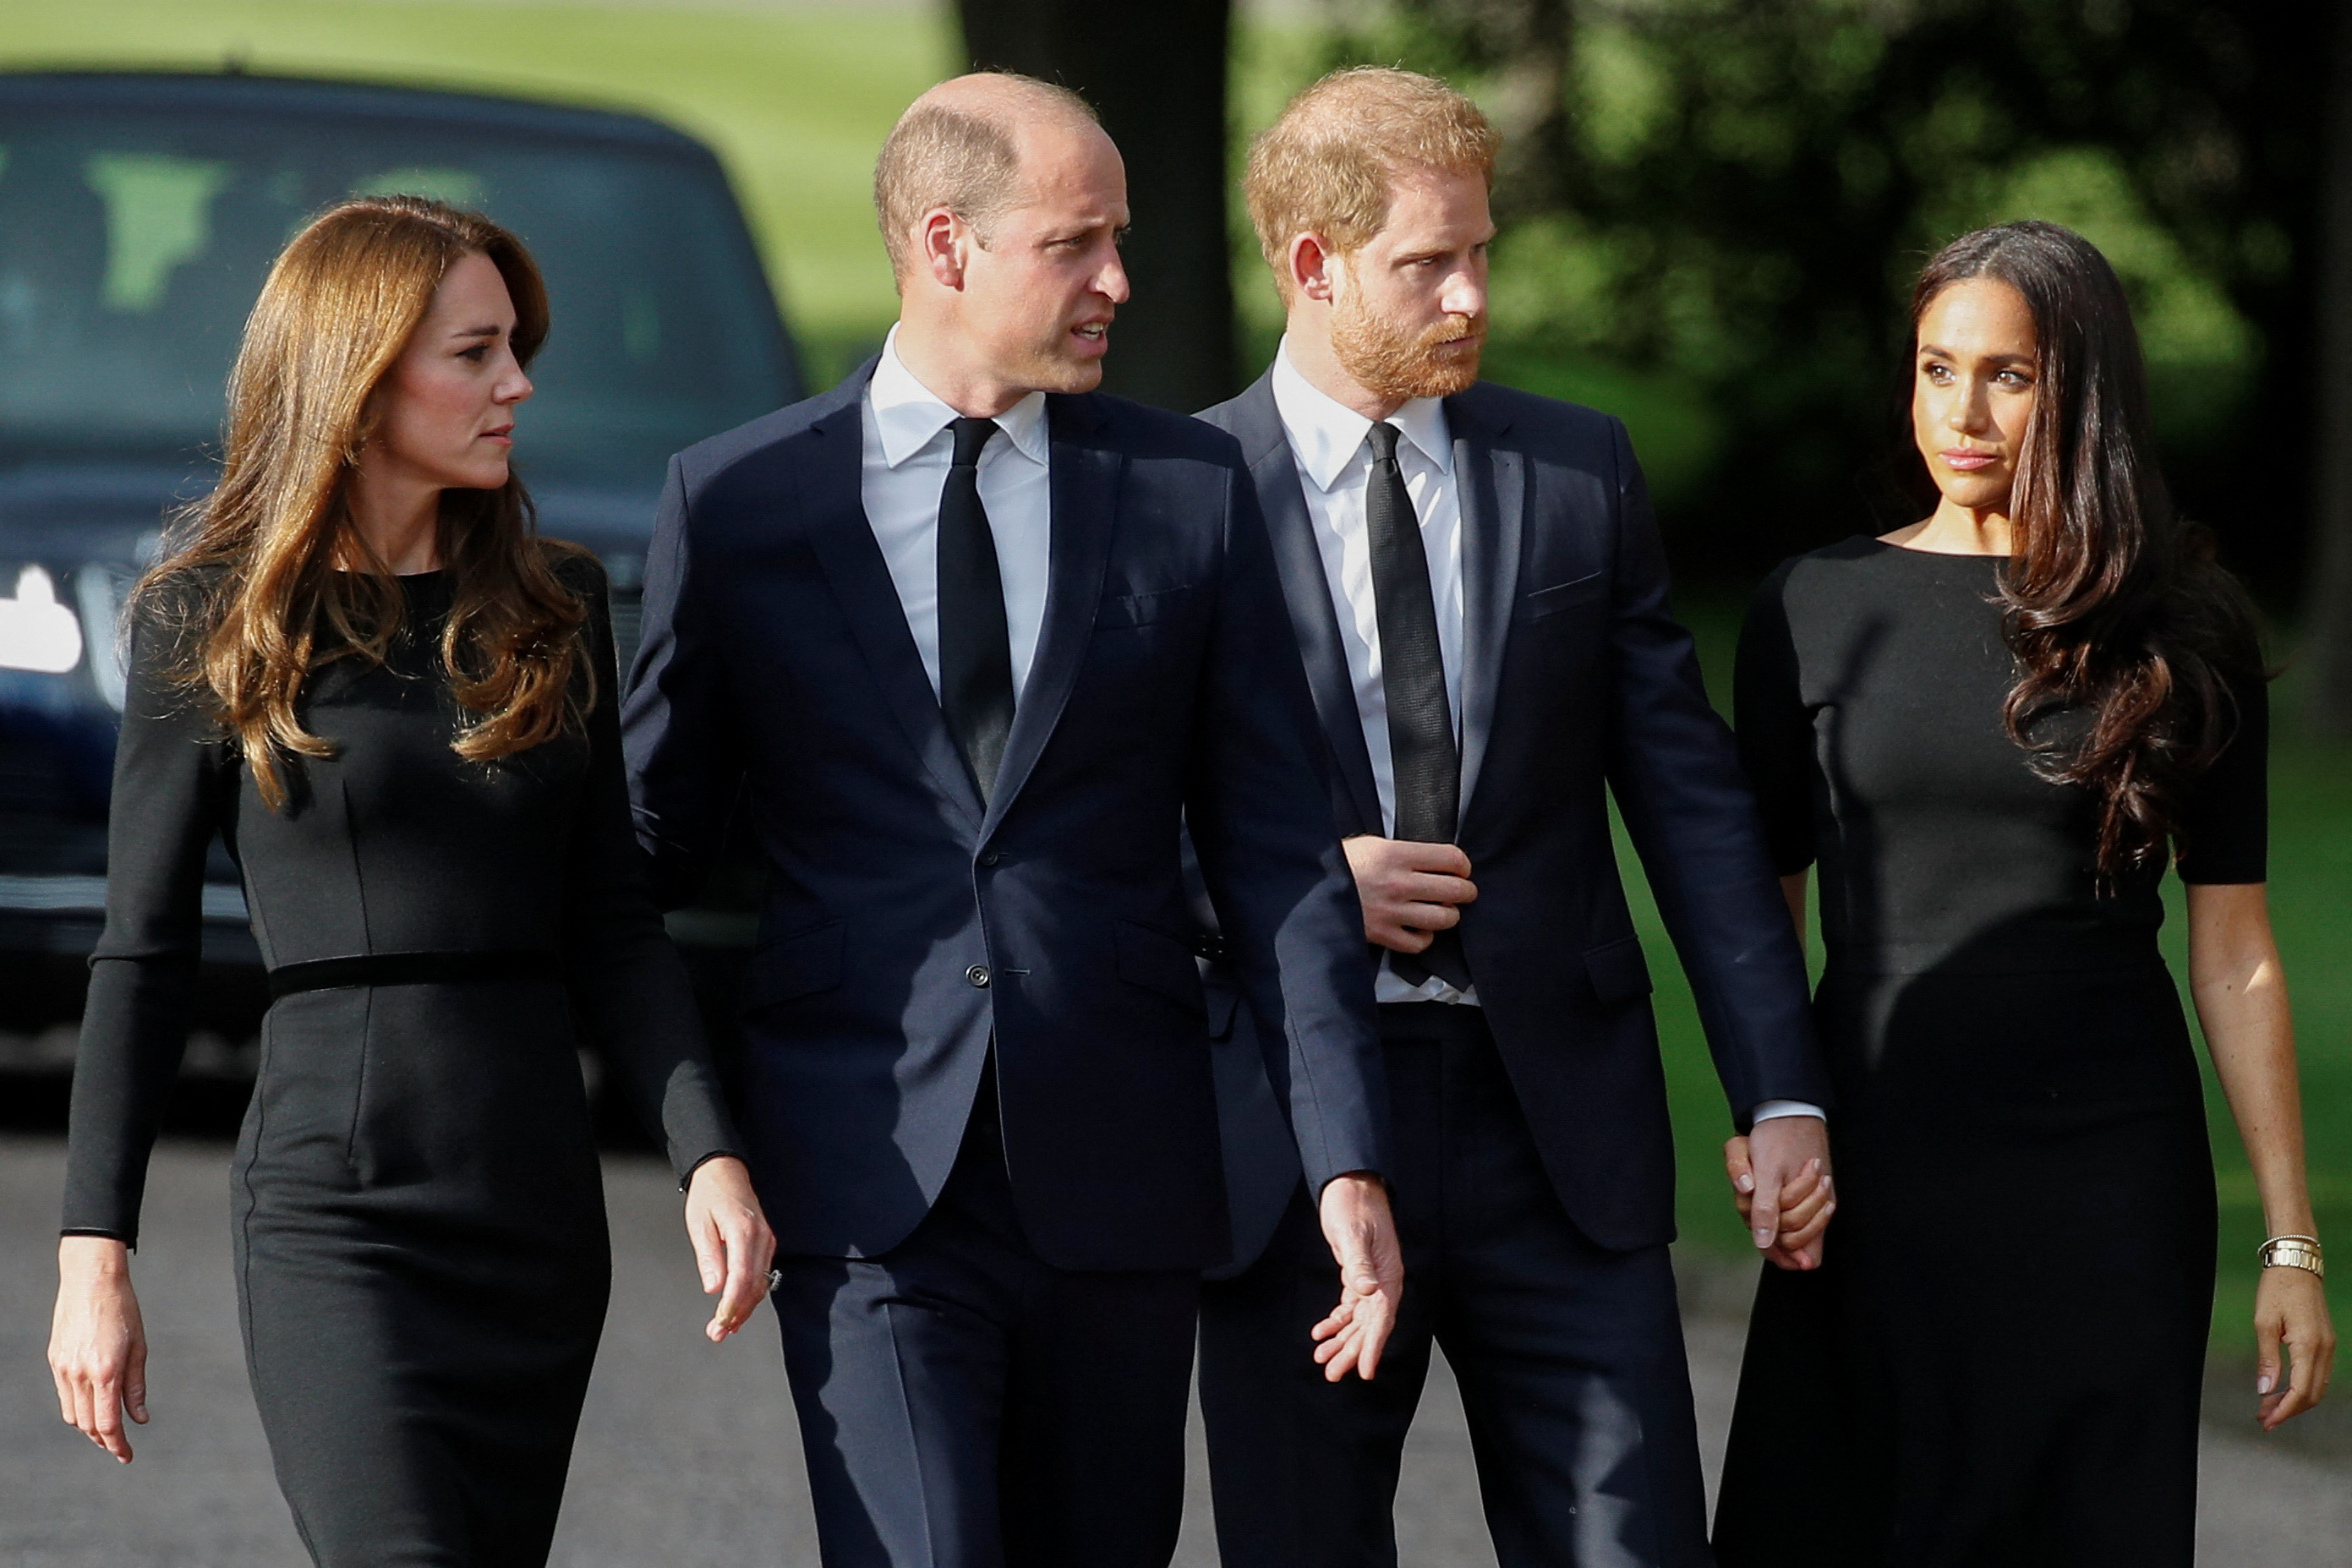 Prince Harry, Meghan join William and Kate on Windsor walkabout | Reuters